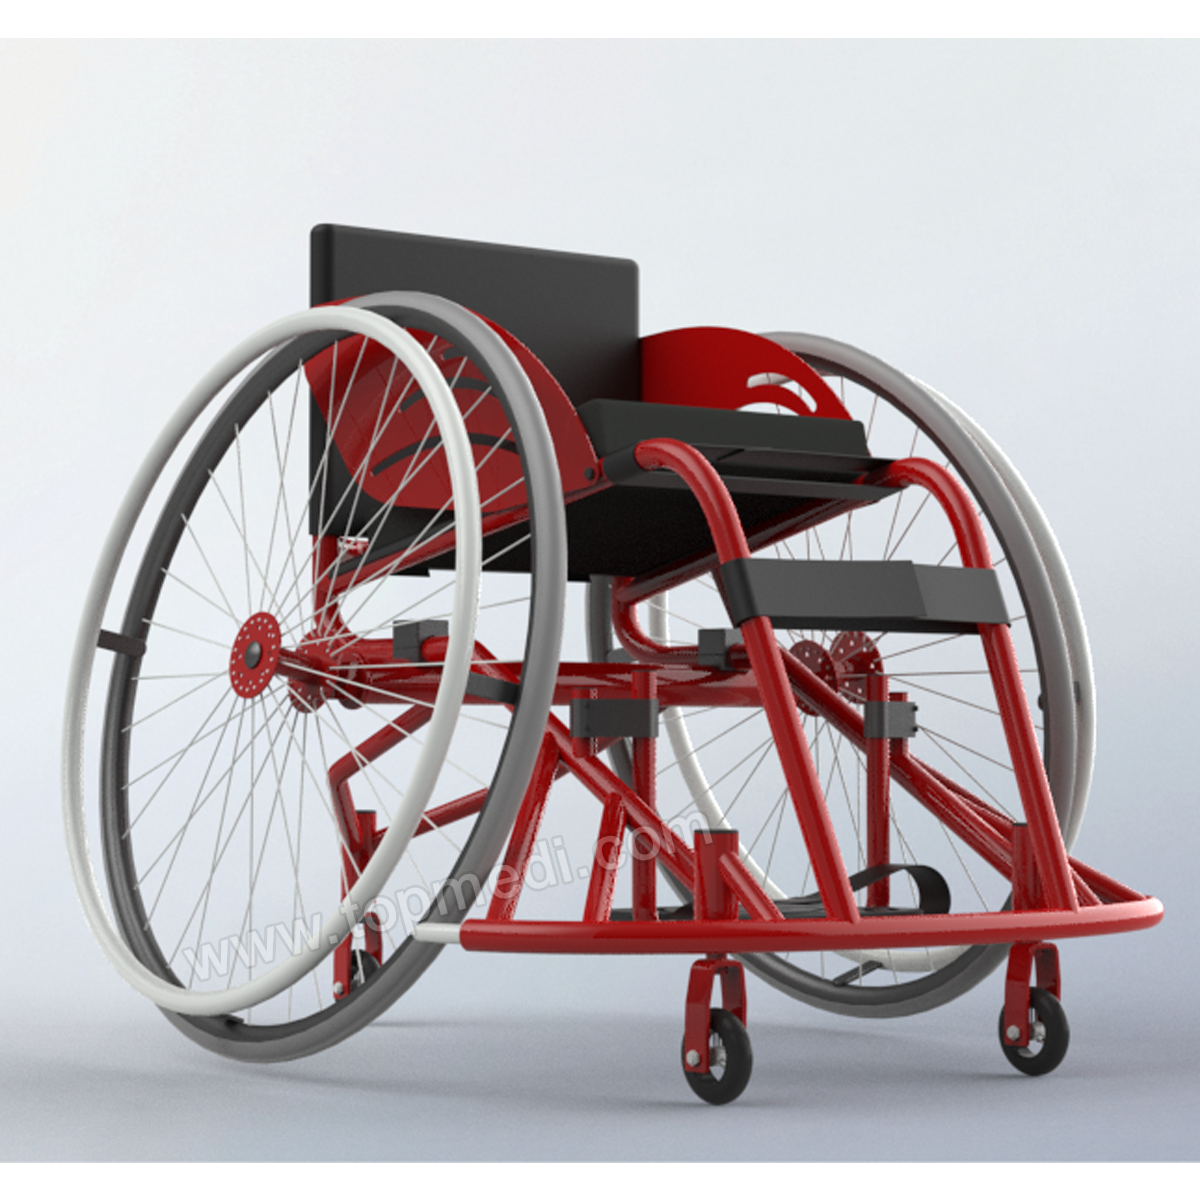 What are the characteristics of sports wheelchairs